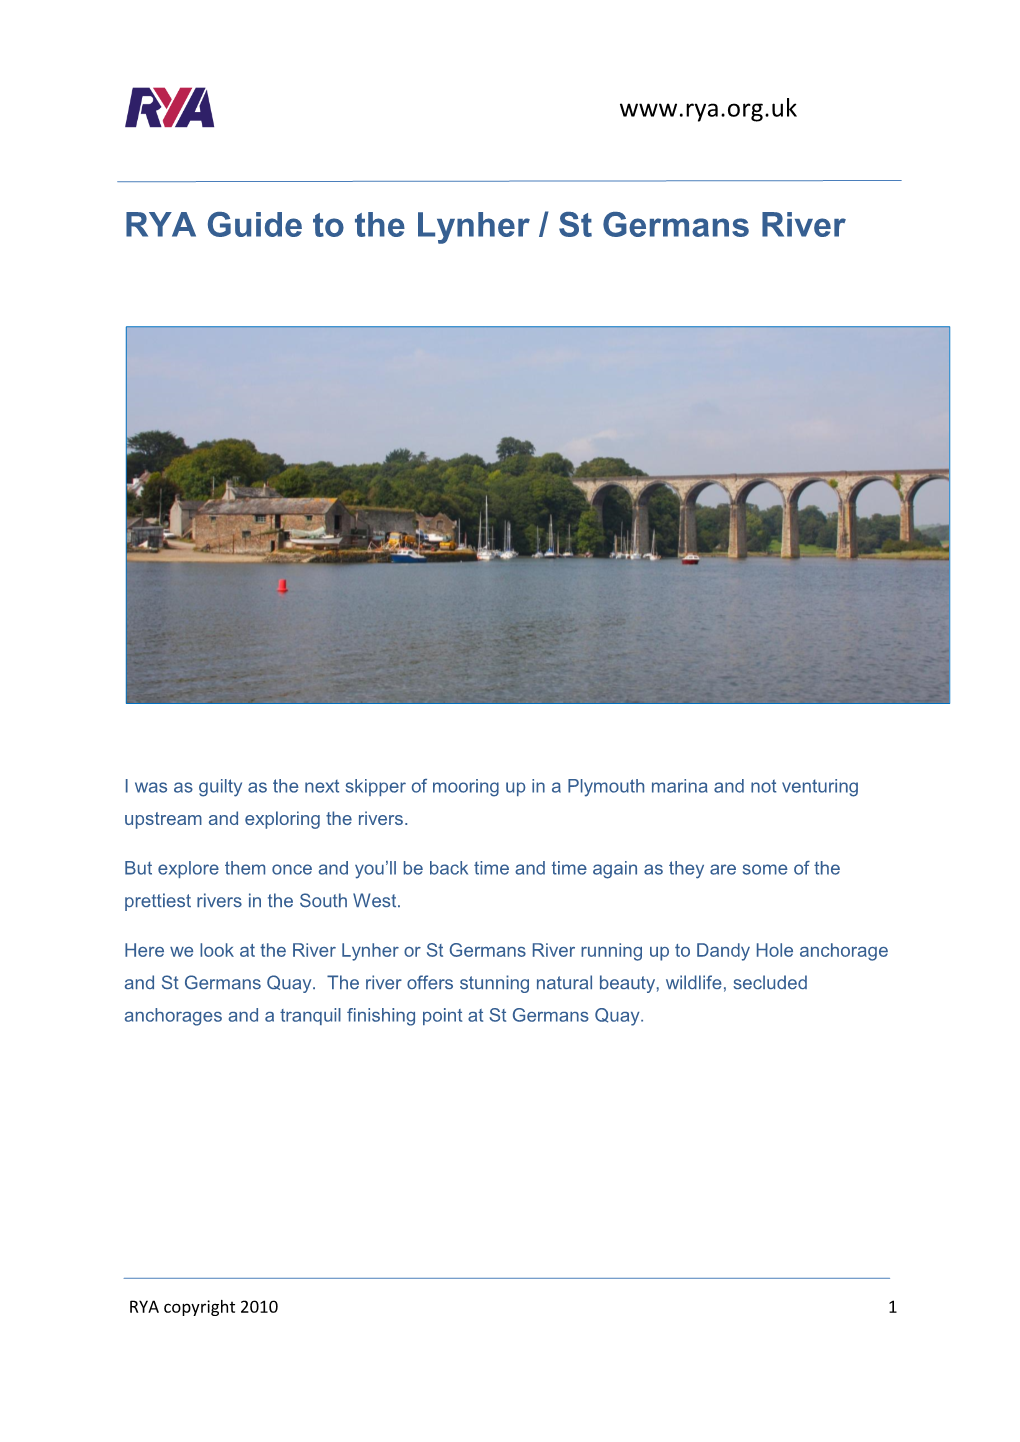 RYA Guide to the Lynher / St Germans River